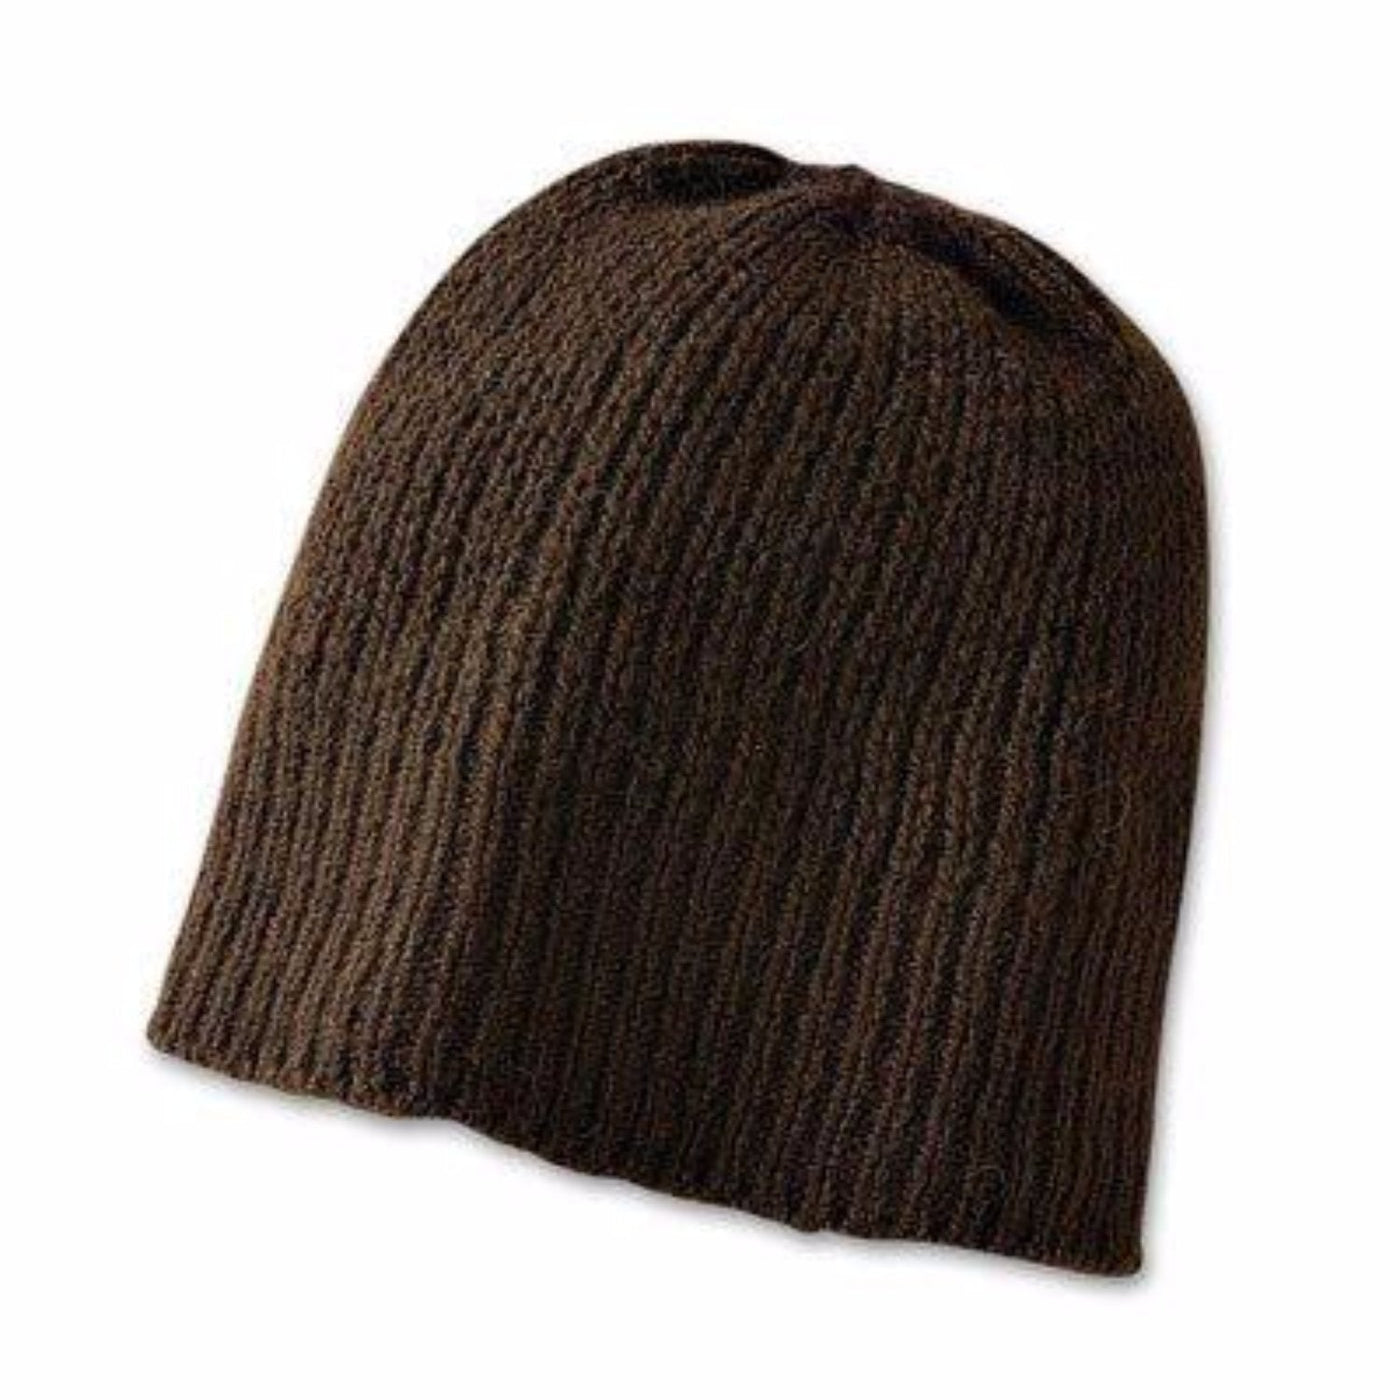 Bison Beanie Bison Gear The Buffalo Wool Co. Ribbed - Brown 